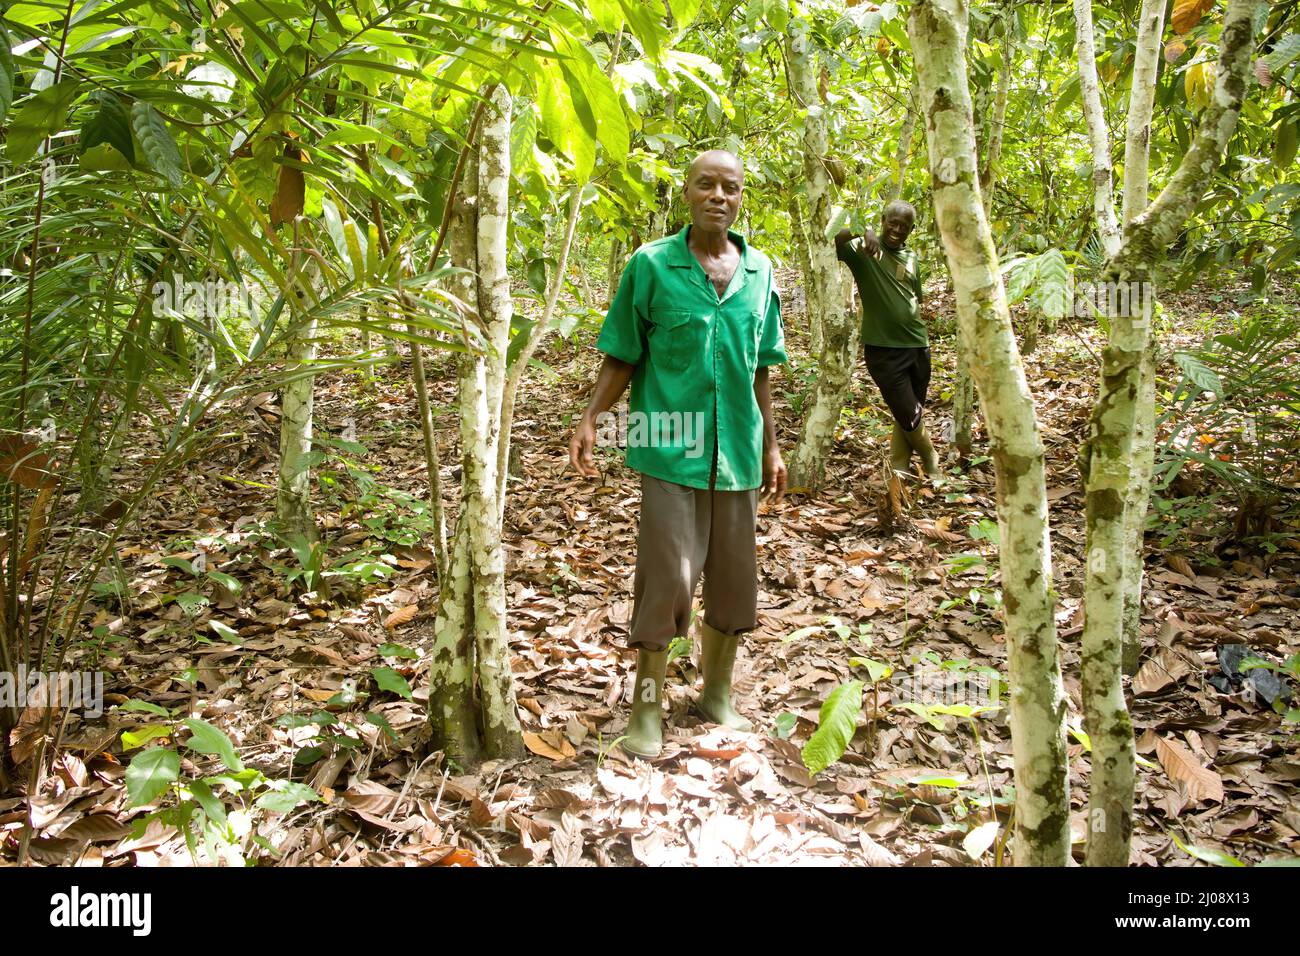 two cocoa farmers under shade trees, Côte d'Ivoire Stock Photo